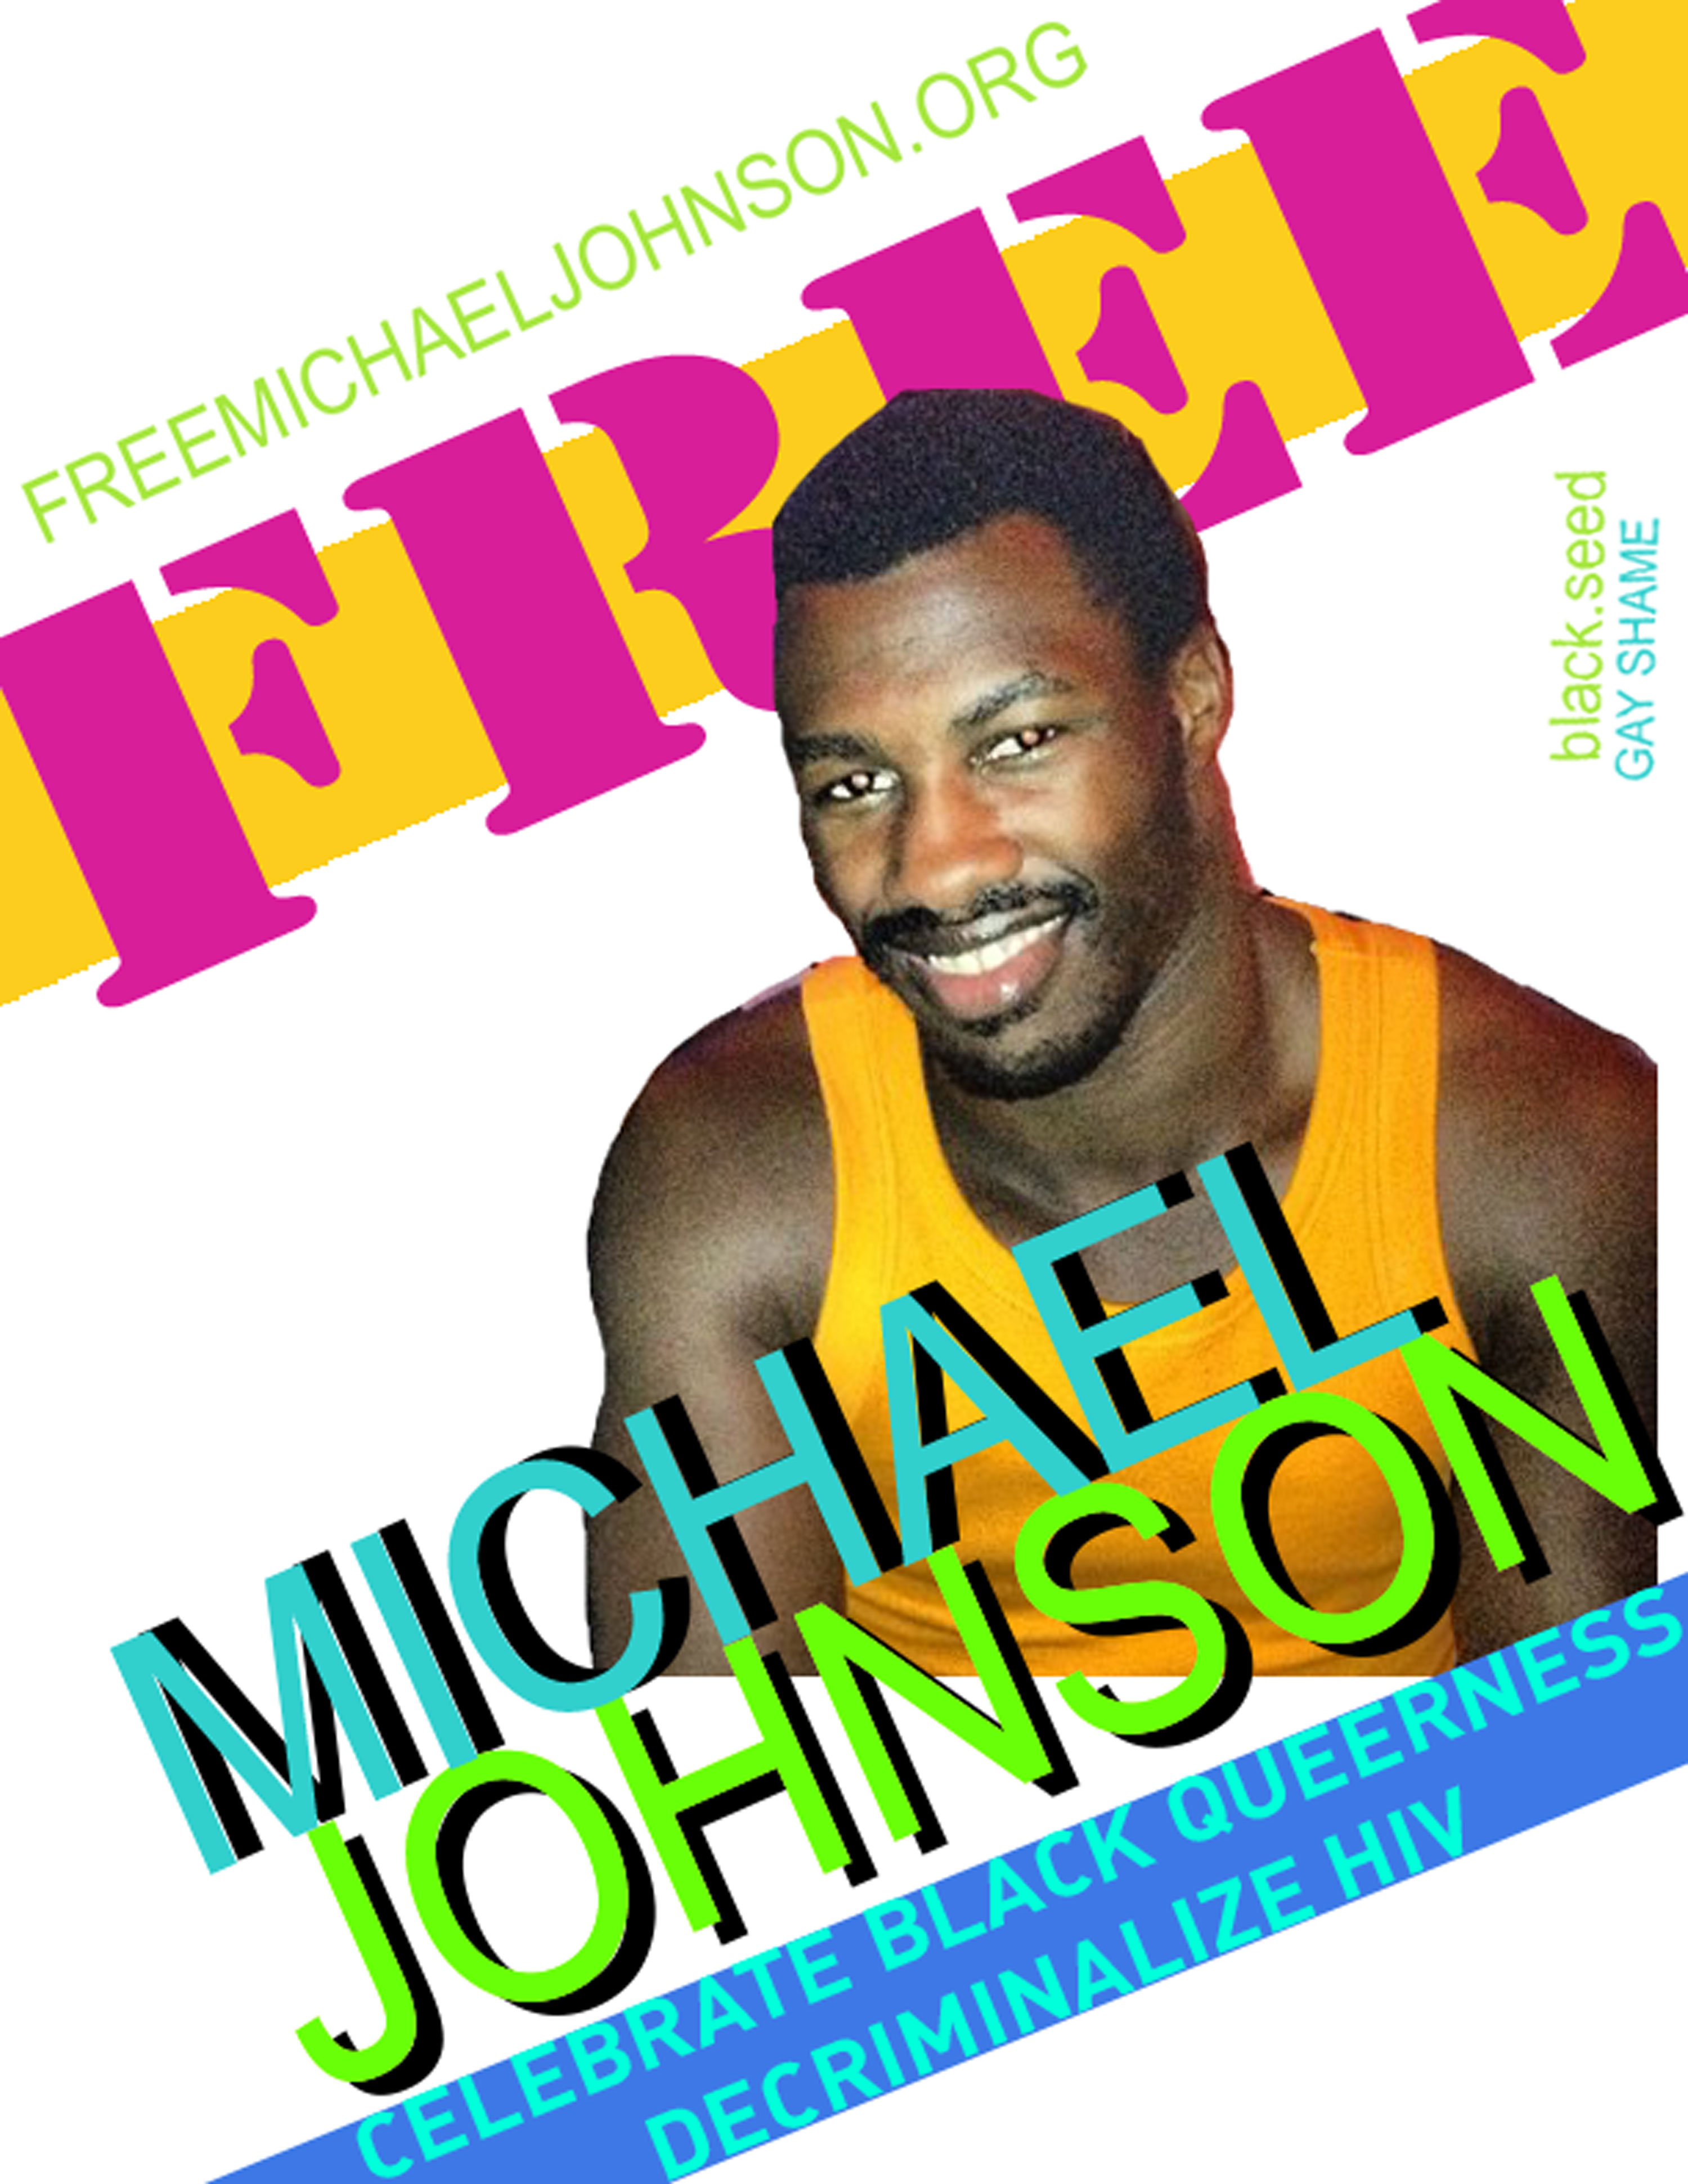 Free Michael Johnson flyer. From black.seed and Gay Shame. Celebrate black queerness: Decriminalize HIV.